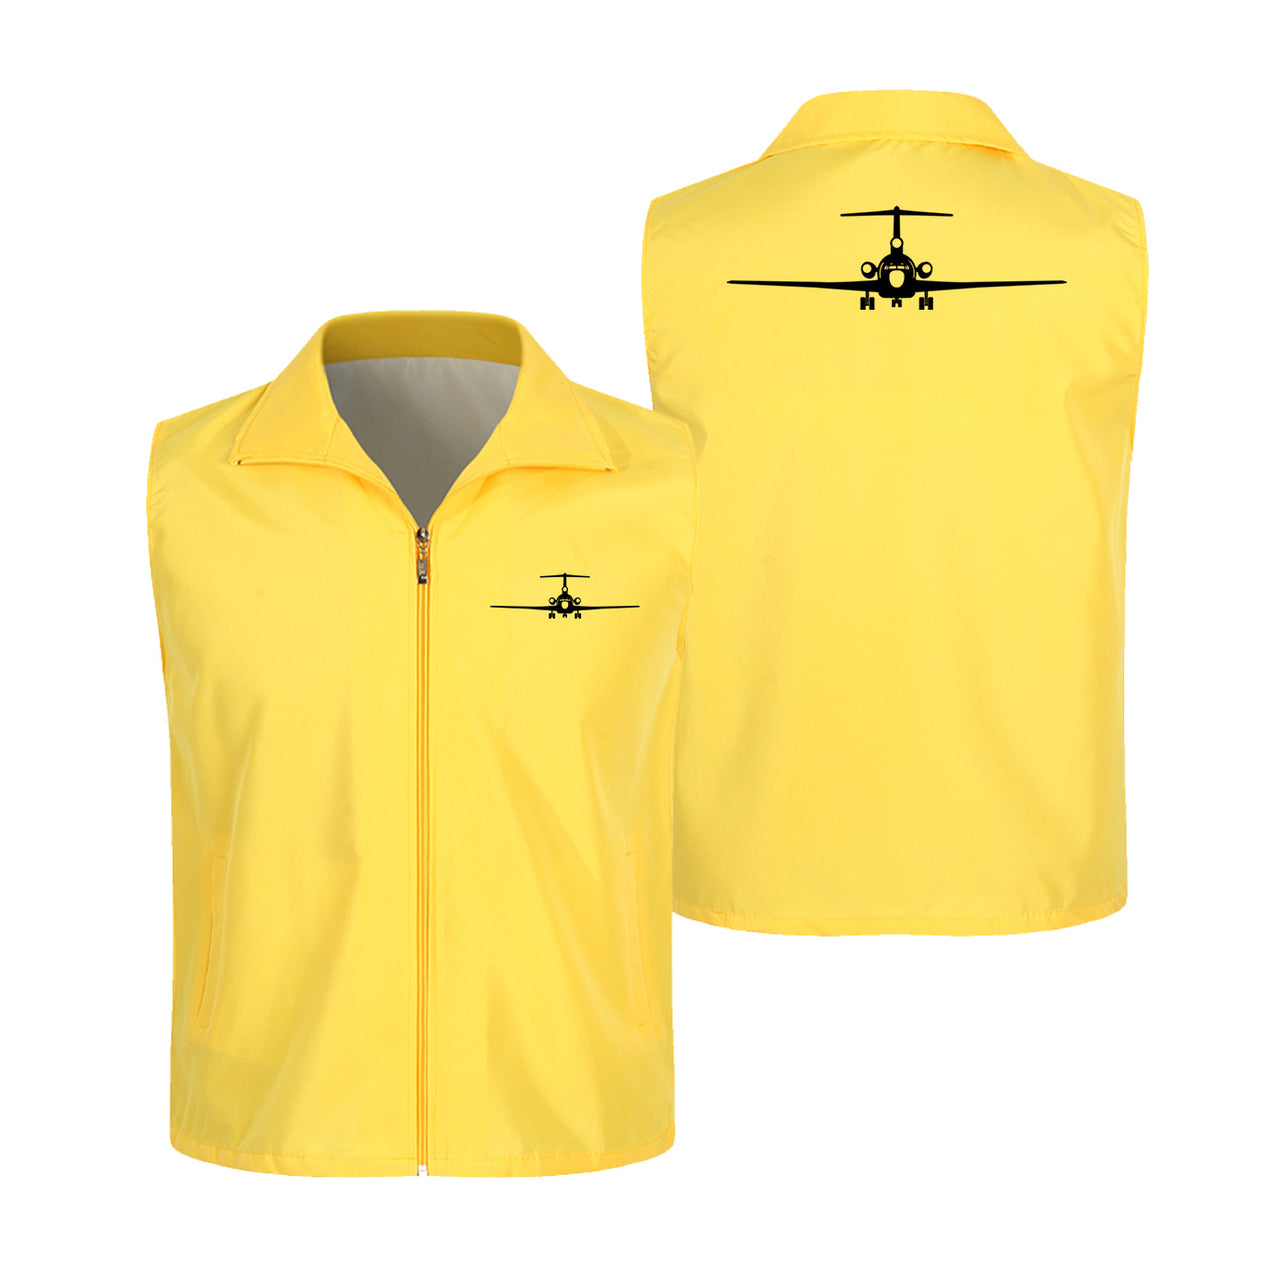 Boeing 727 Silhouette Designed Thin Style Vests